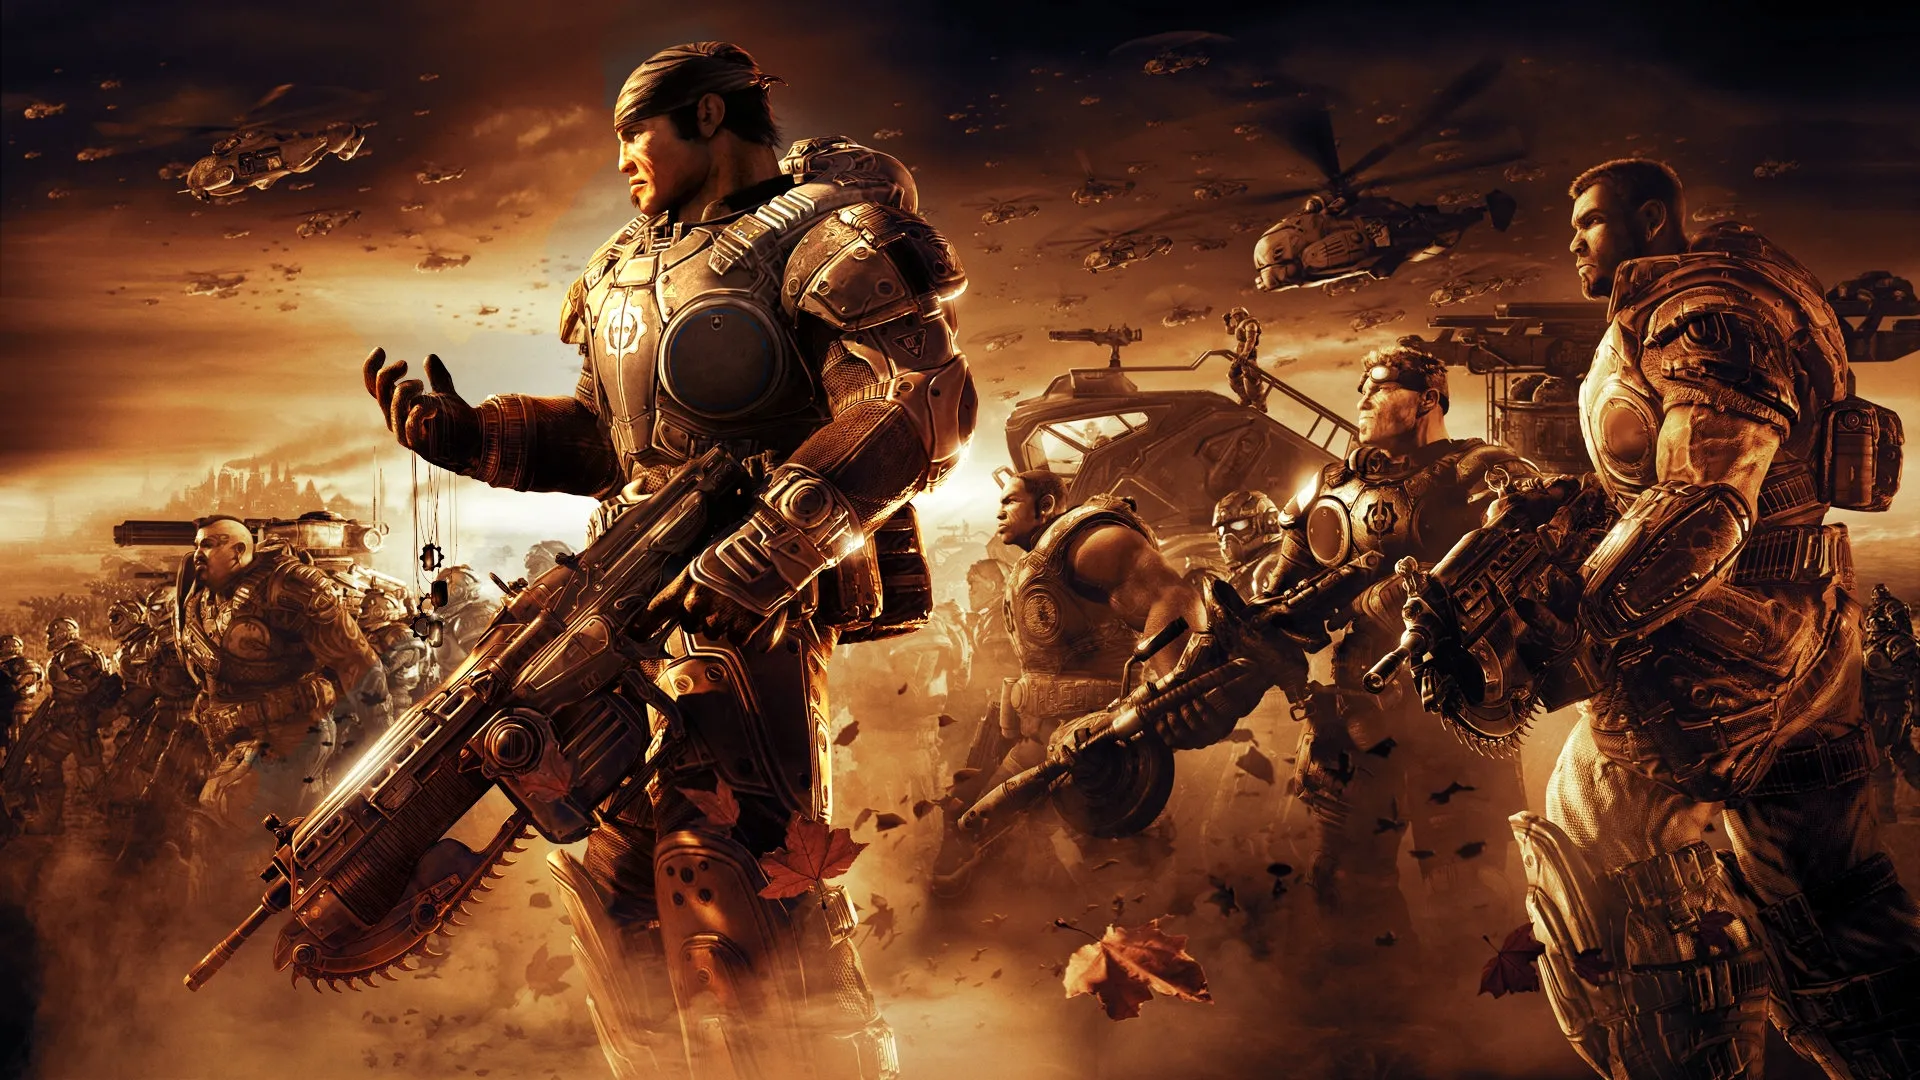 Netflix takes film and TV rights to the famous game 'Gears of War' | FMV6